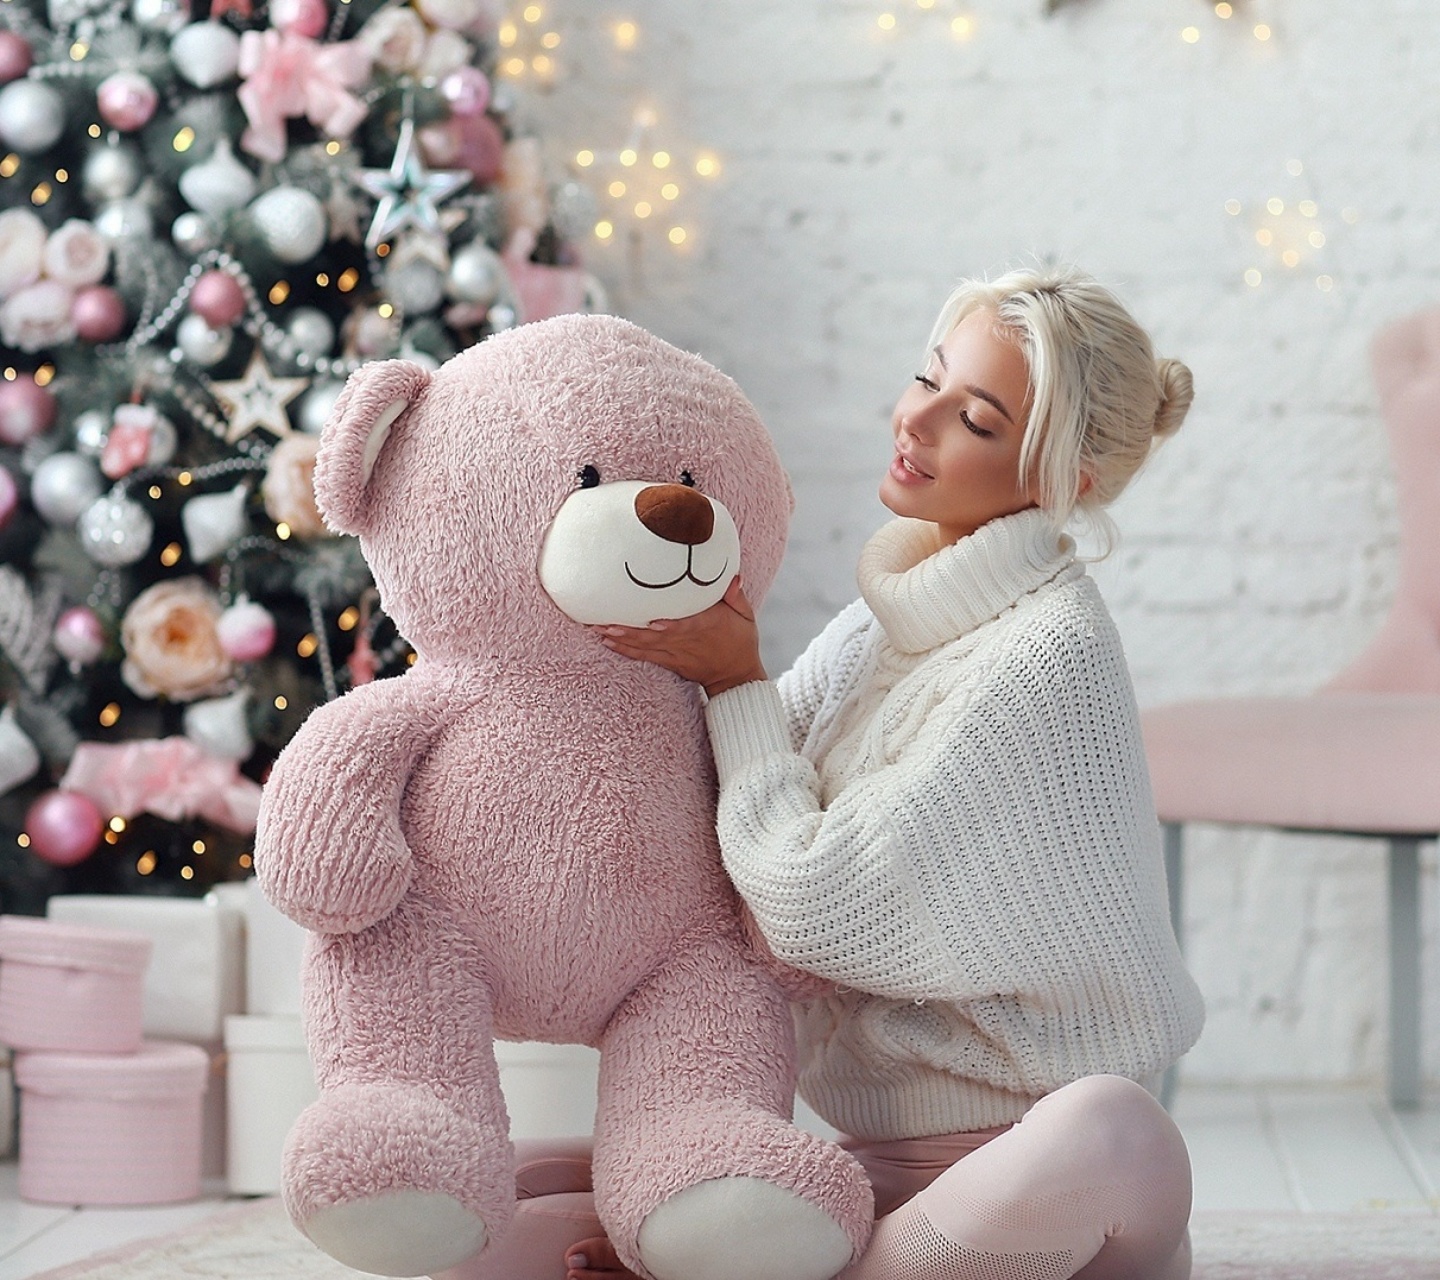 Das Christmas photo session with bear Wallpaper 1440x1280